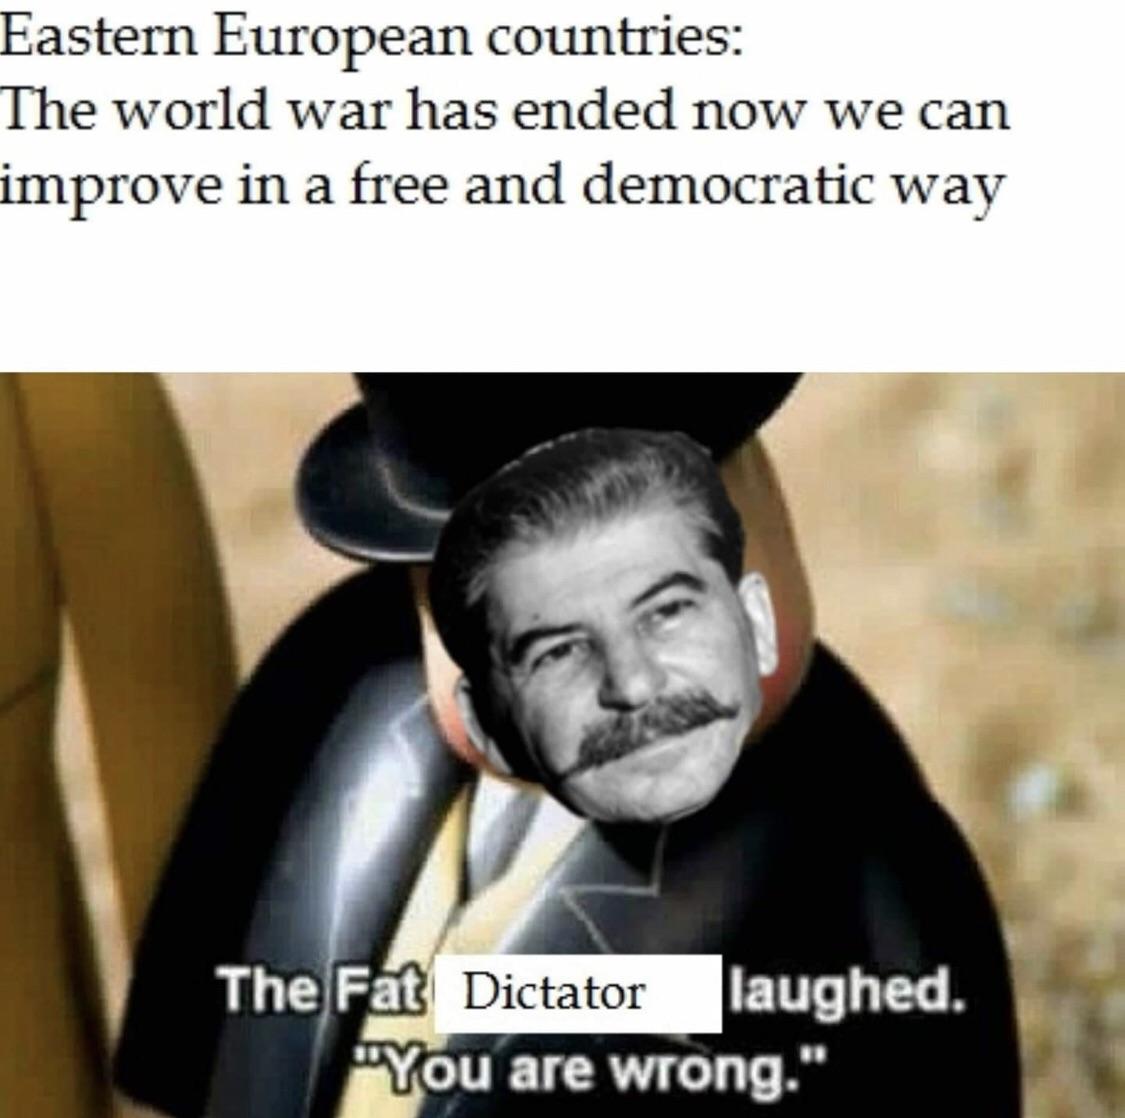 margaret bourke white stalin - Eastern European countries The world war has ended now we can improve in a free and democratic way The Fat Dictator laughed. "You are wrong."